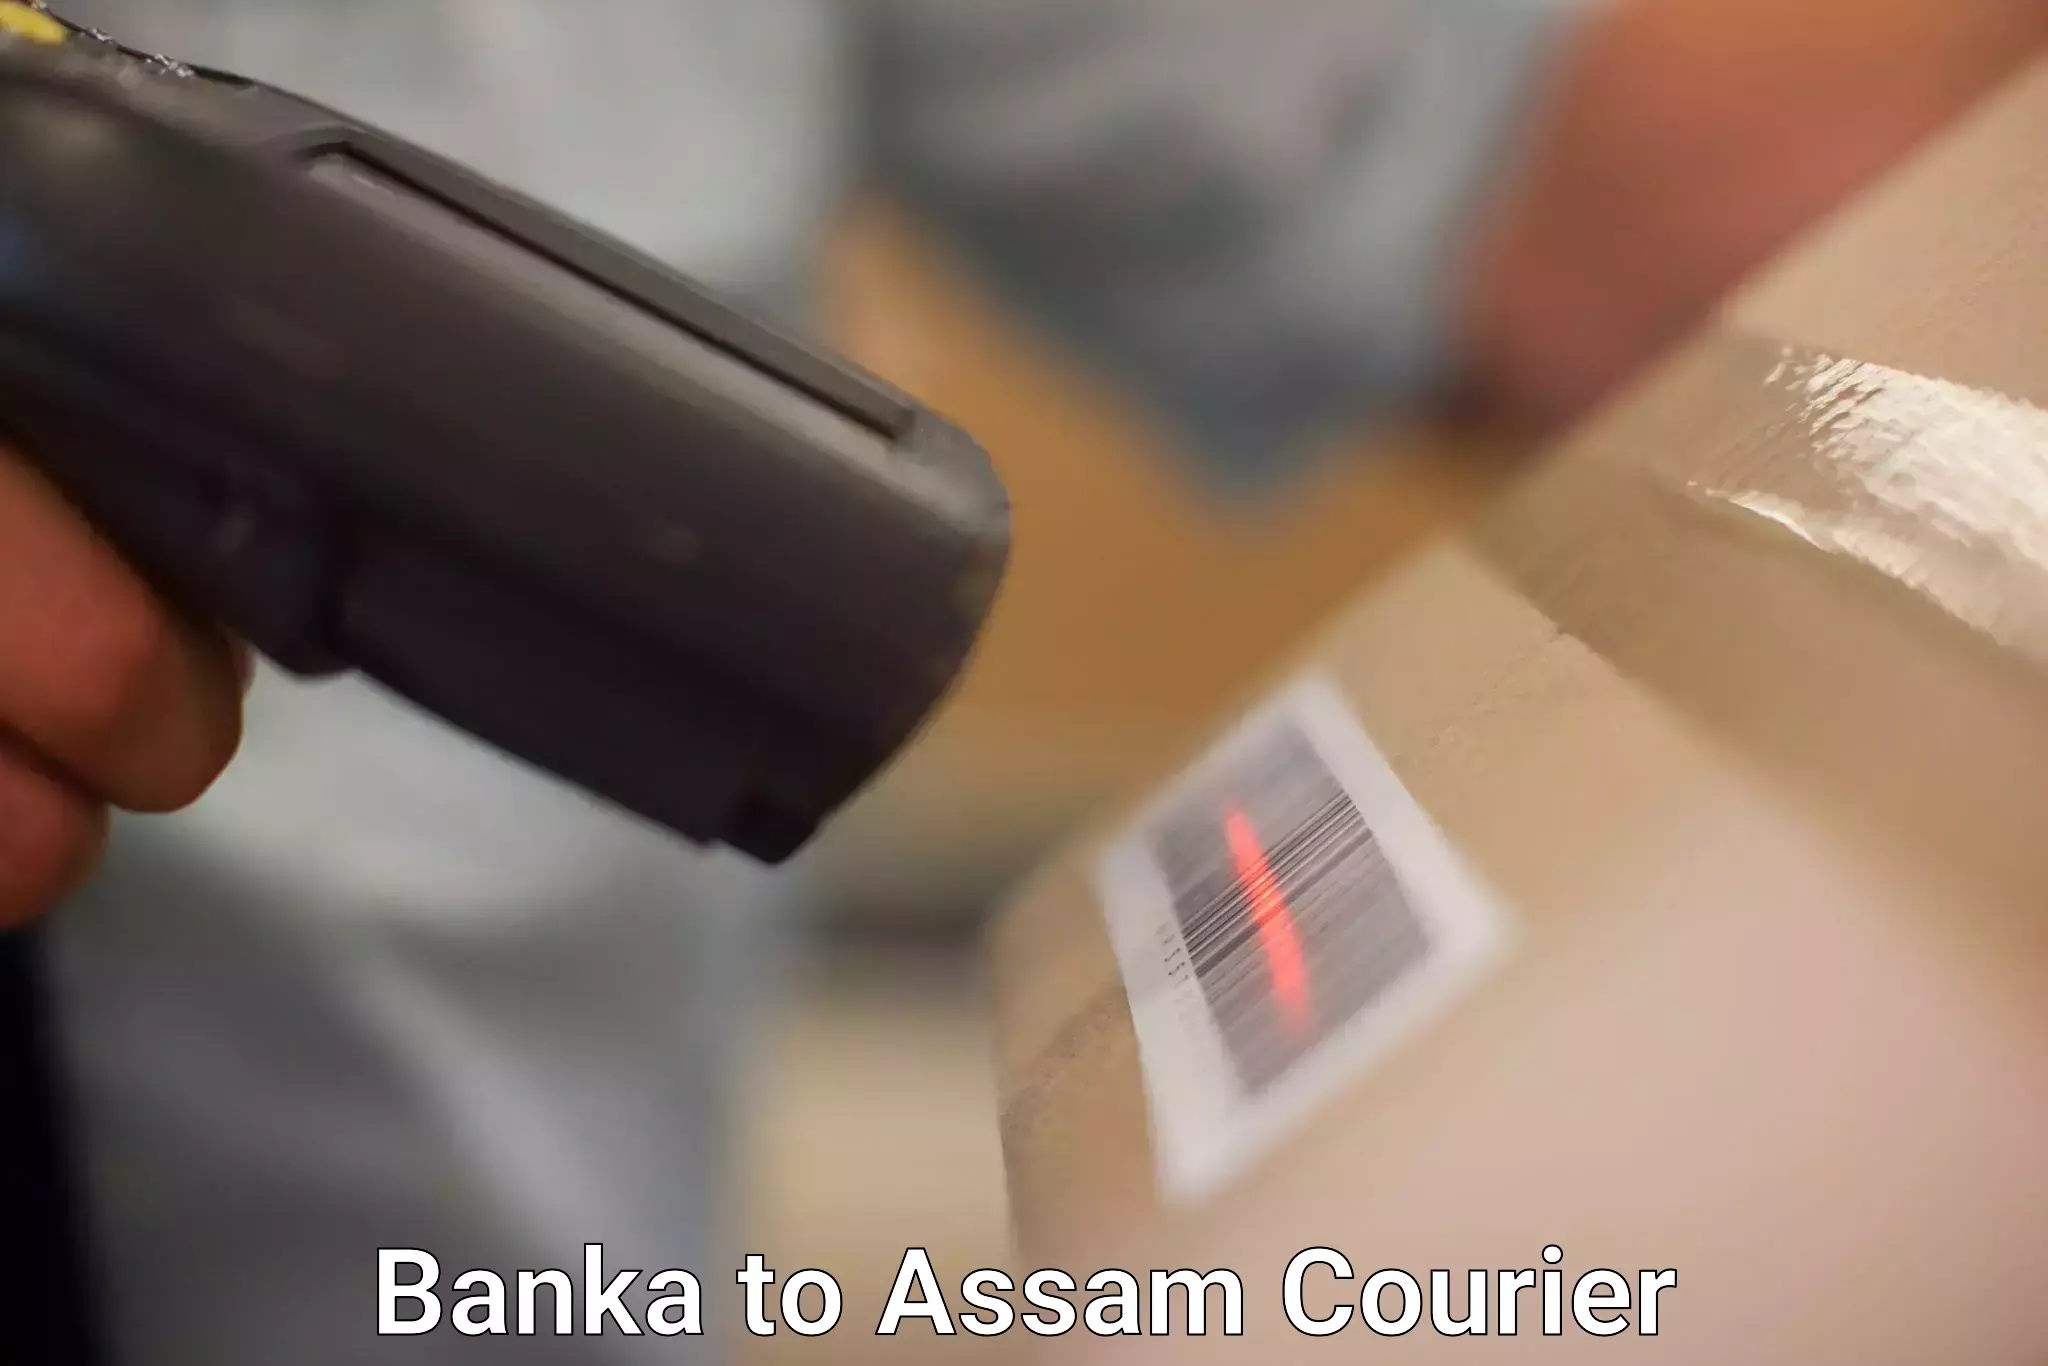 Enhanced tracking features Banka to Assam